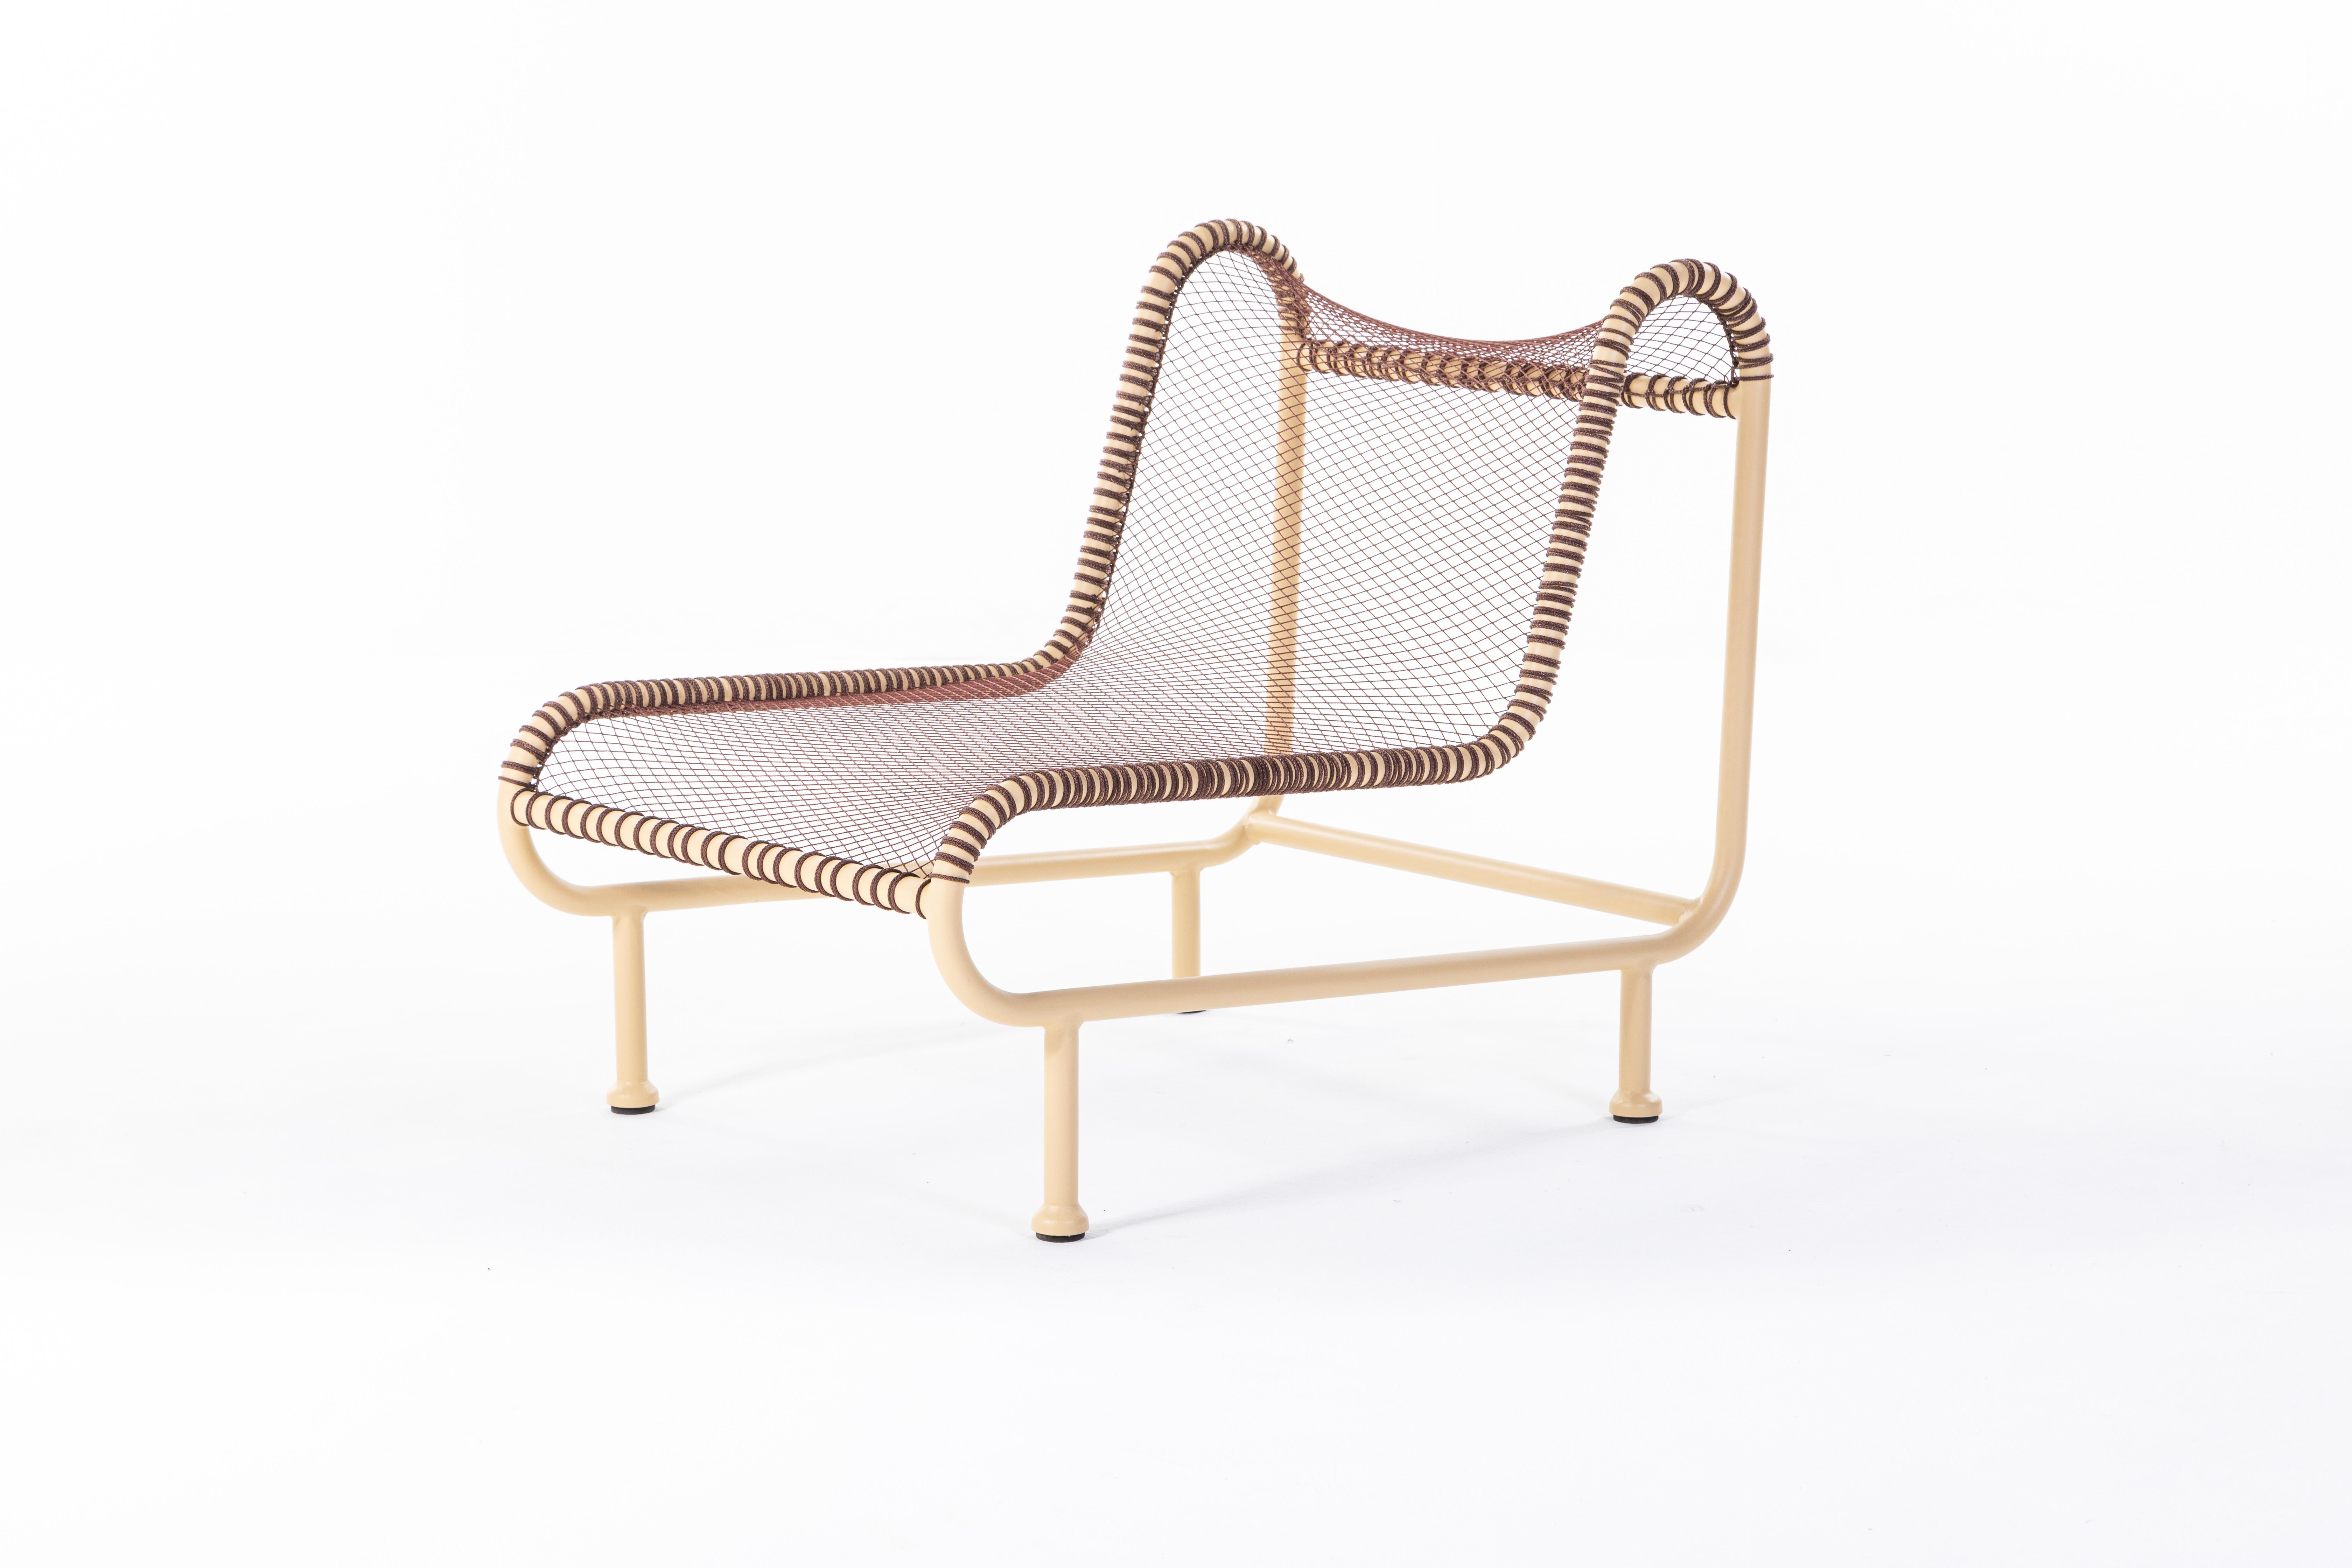 Grand Ribaud lounge chair, powder coated steal and fishing net by 13 Desserts. 
Designed by Thomas DEFOUR, edited by 13Desserts.

The Grand Ribaud armchair is designed for “lazing around” in extreme conditions. It is made using techniques tradi-